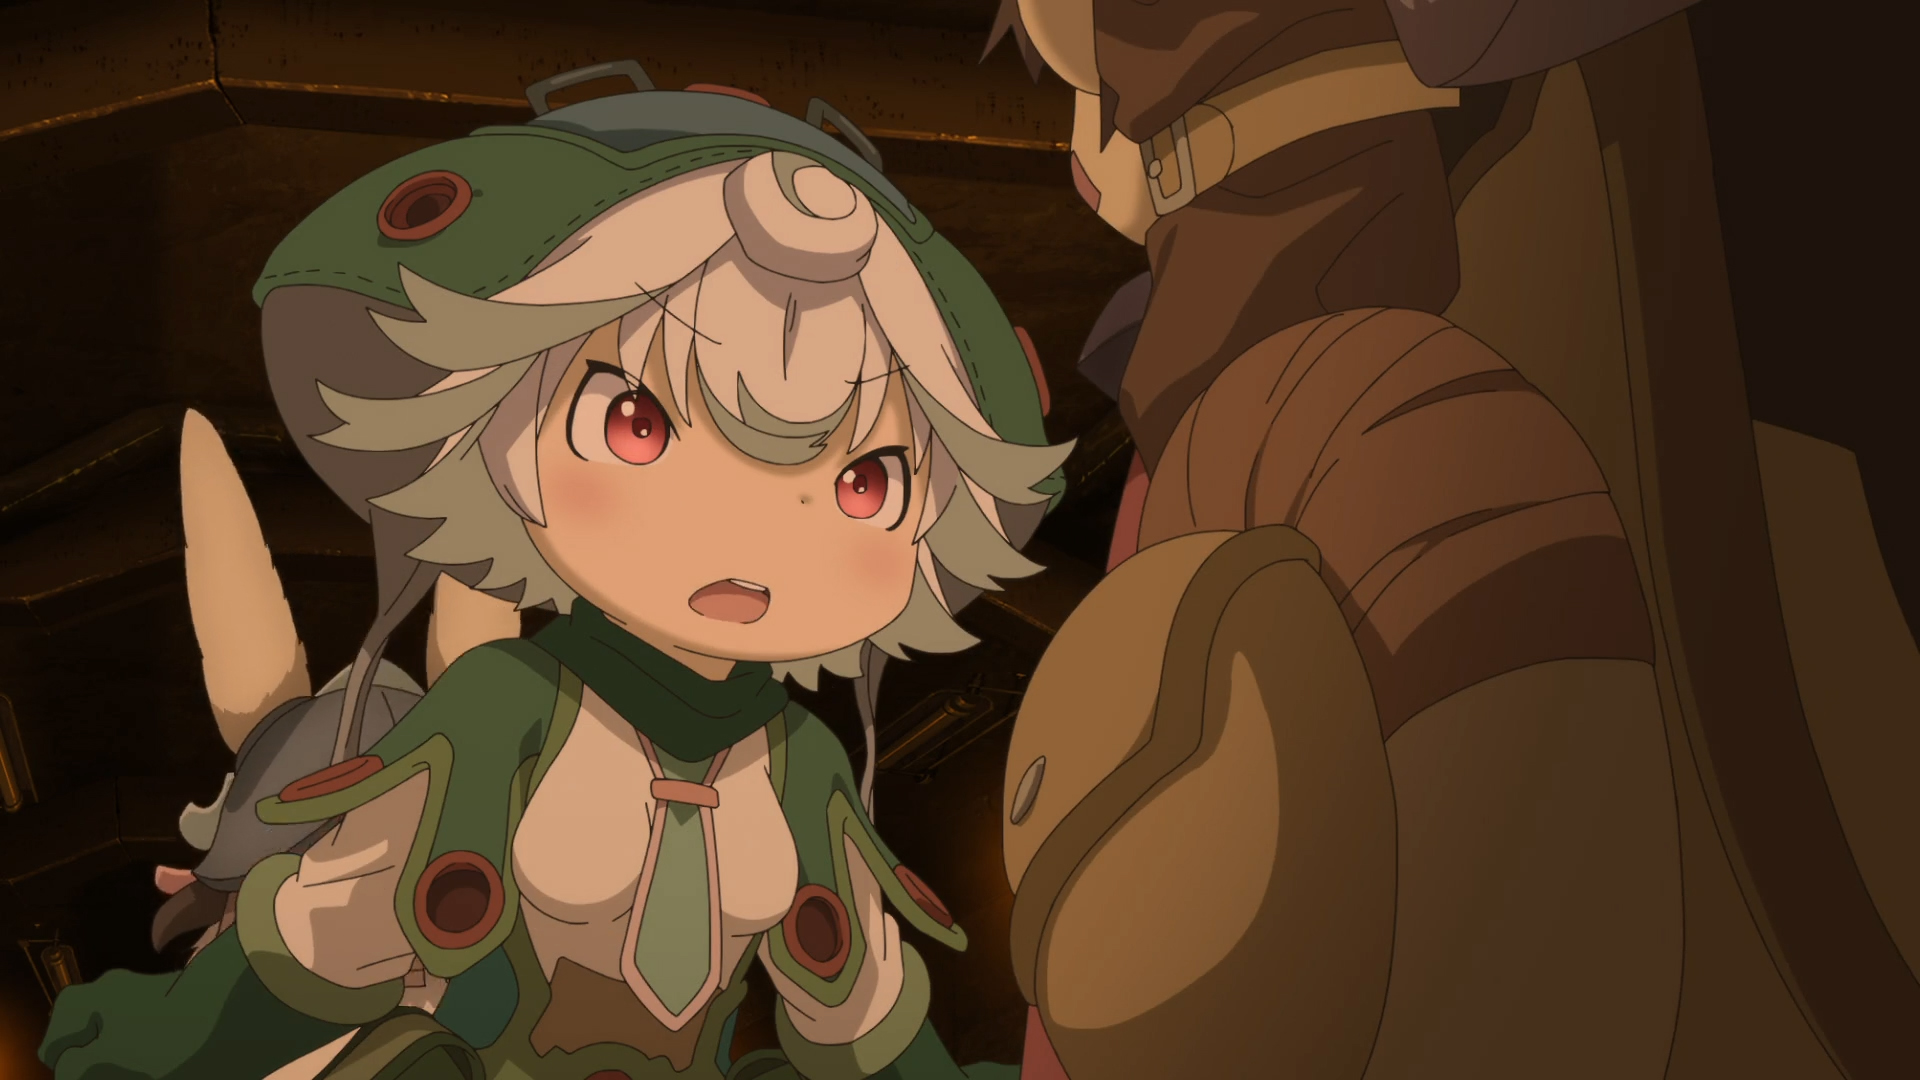 Made in Abyss: Dawn of the Deep Soul Film's Age Rating Changed to R15+ -  News - Anime News Network